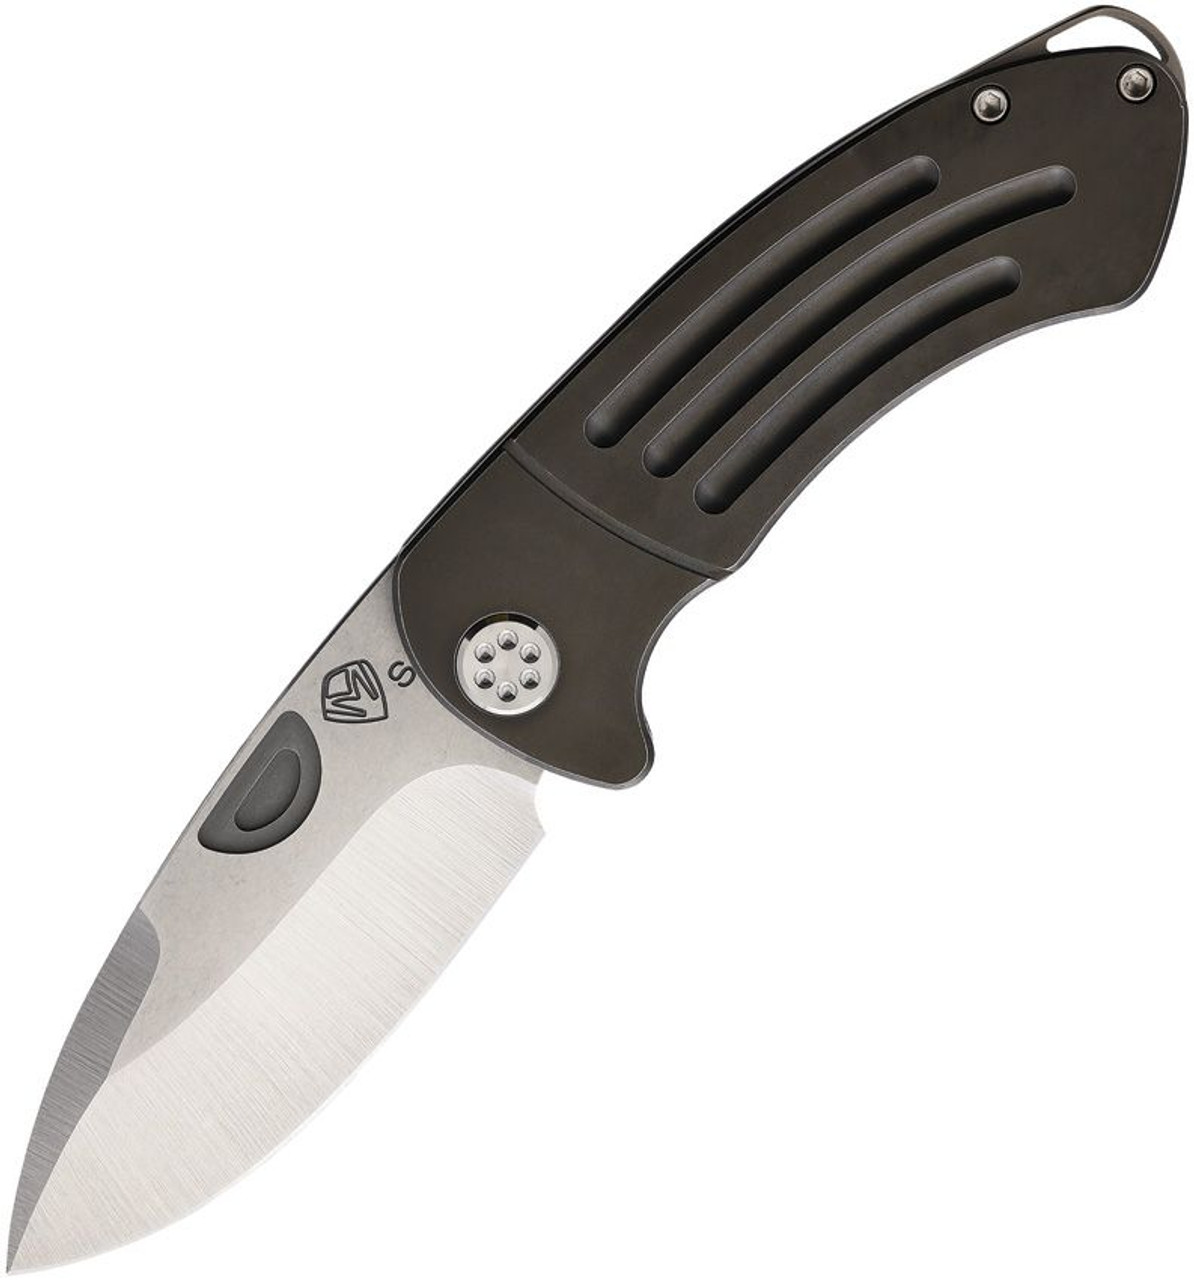 Medford Knife & Tool Theseus (MD040ST31PT) 3.6" CPM-S35VN Stonewashed Drop Point Blade, Bronze PVD Coated Titanium Handle